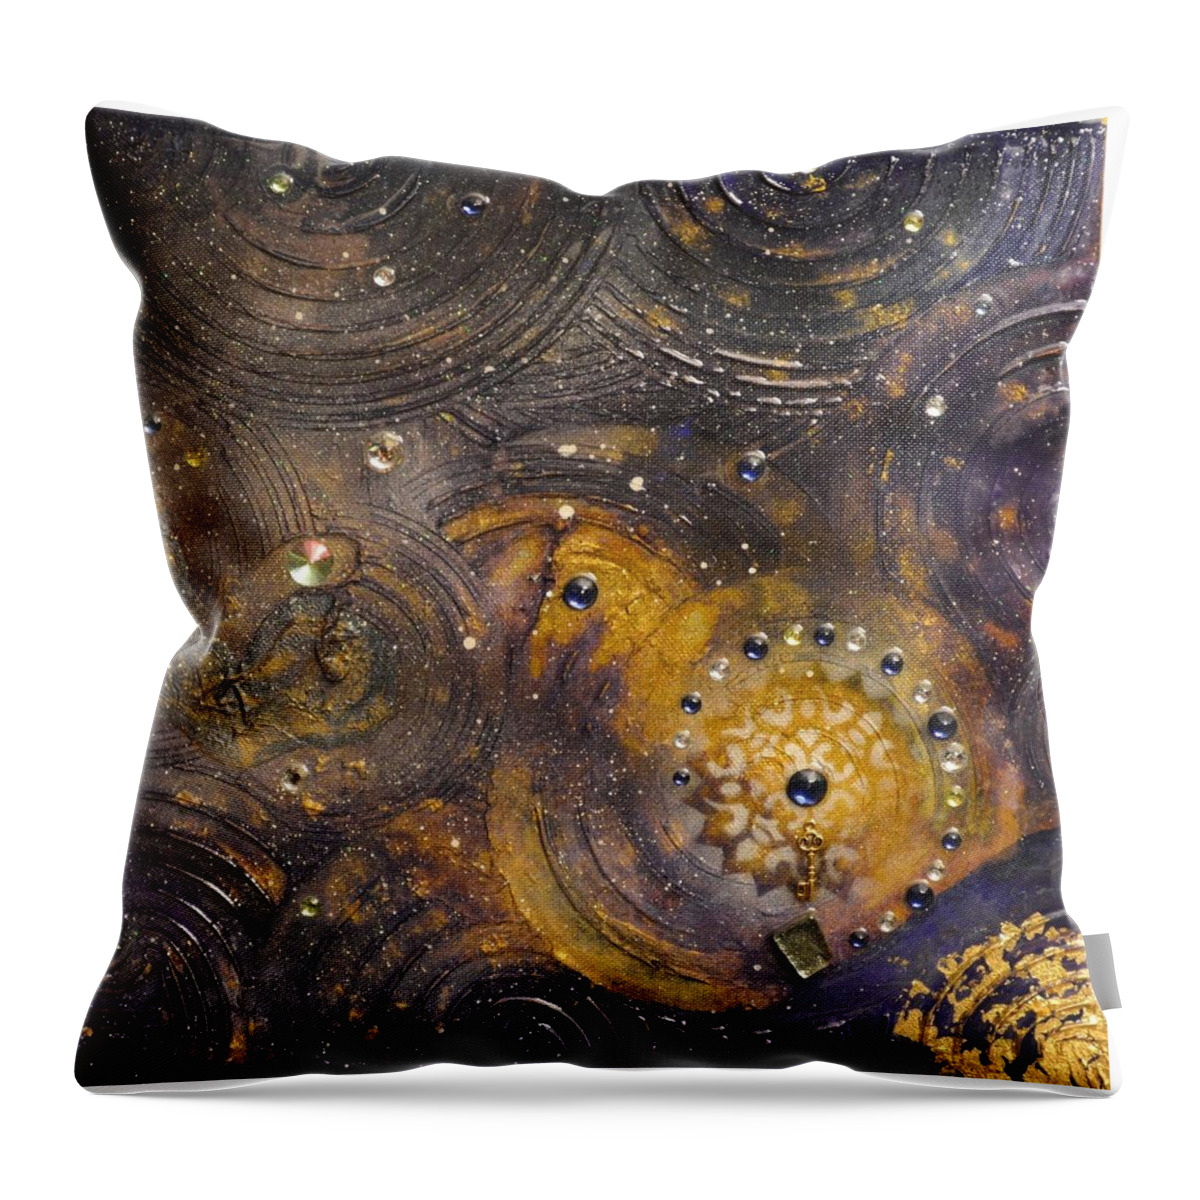 Cosmos Throw Pillow featuring the mixed media Reaction by MiMi Stirn